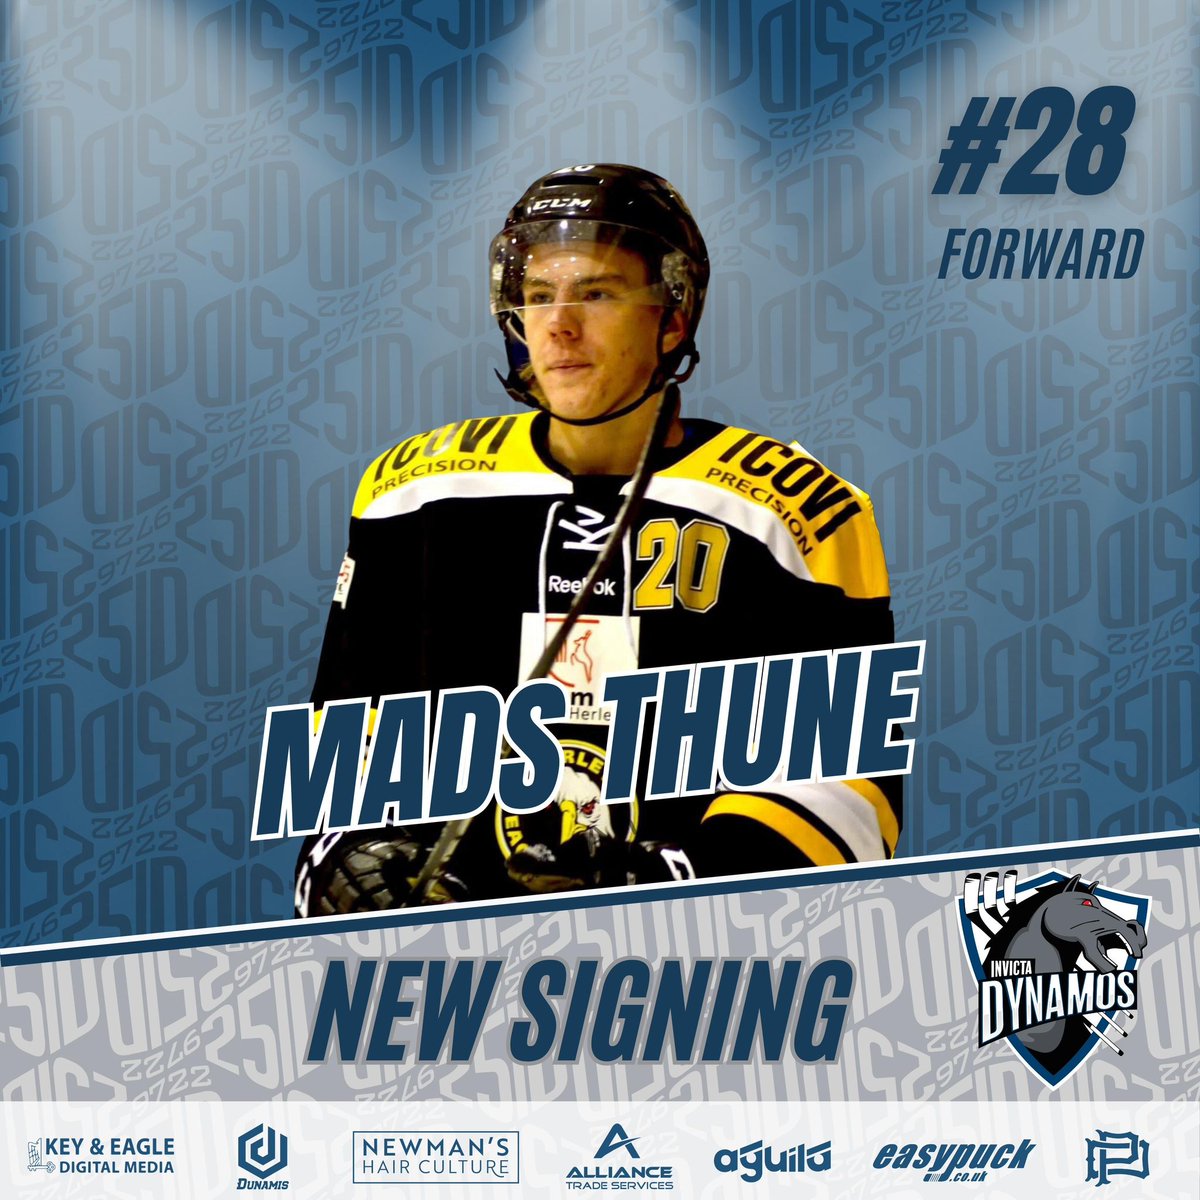 MADS THUNE FILLS 2nd IMPORT SLOT We are delighted to announce the signing of Danish forward Mads Thune. His paperwork has been approved, the 29 year old is clear to play for us this season and will ice from next weekend. Full story here - invictadynamos.co.uk/mads-thune-fil… Welcome Mads!